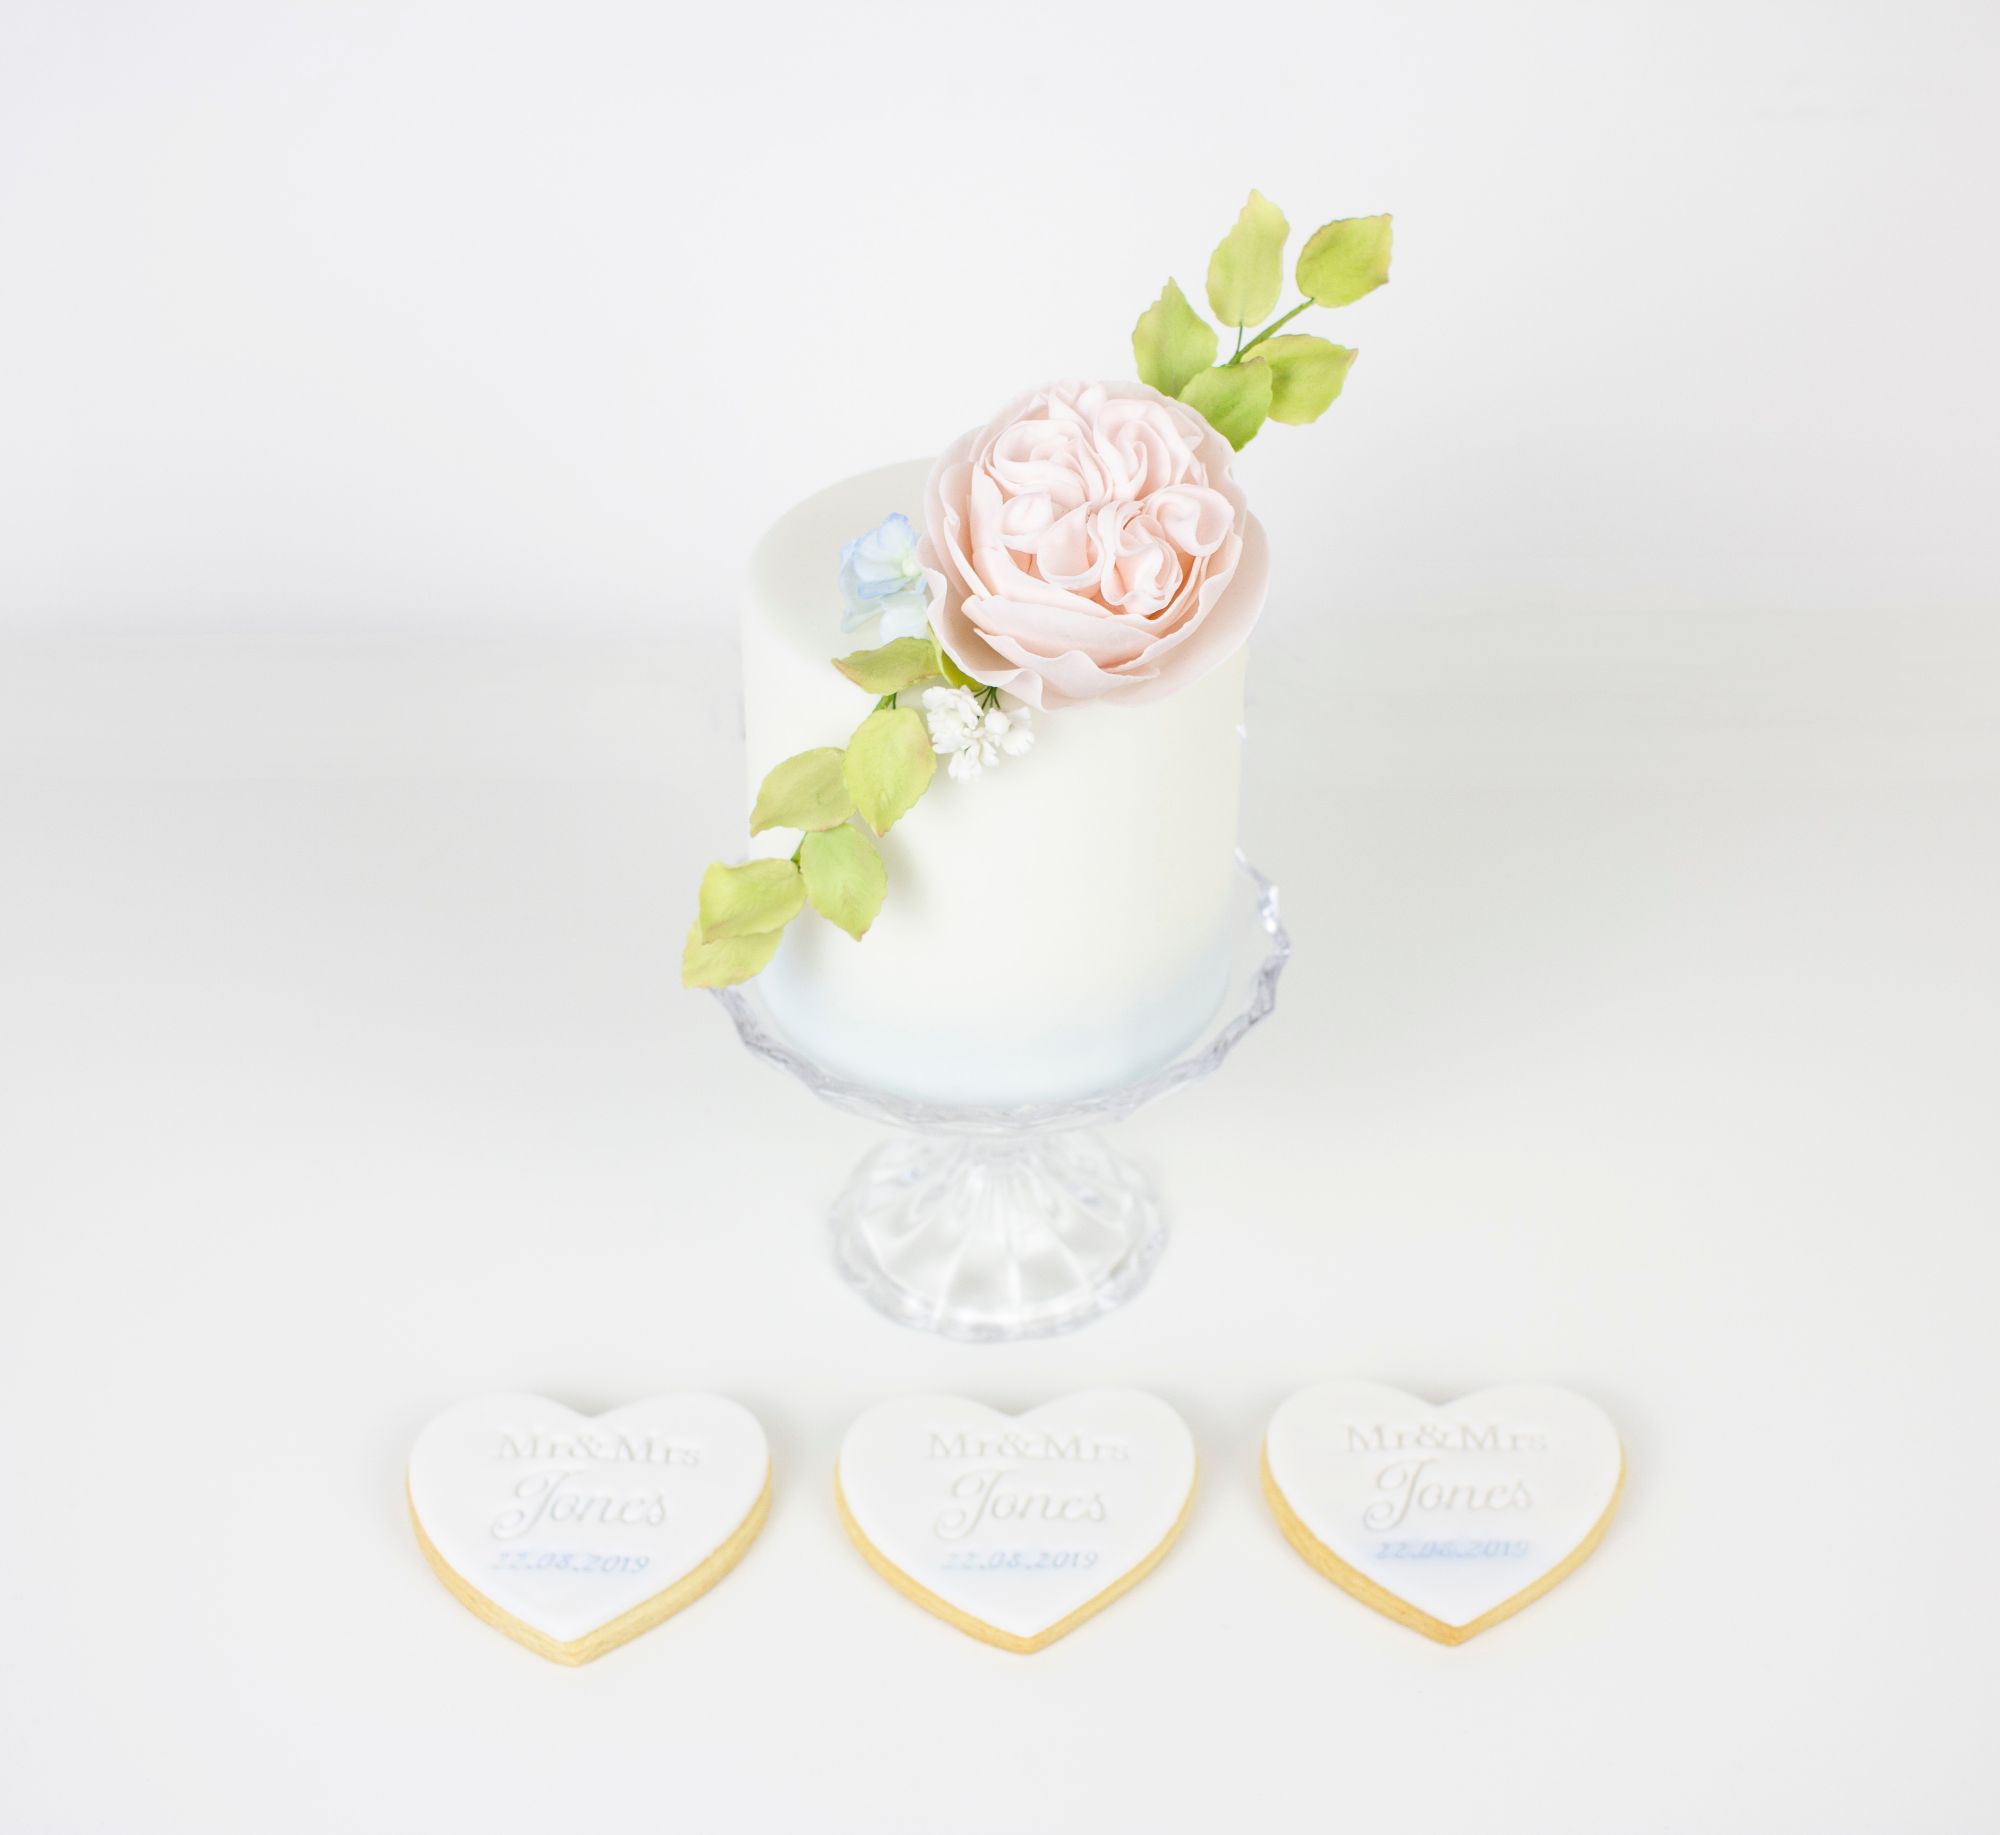 Mini matching cakes & wedding  cookie favours.